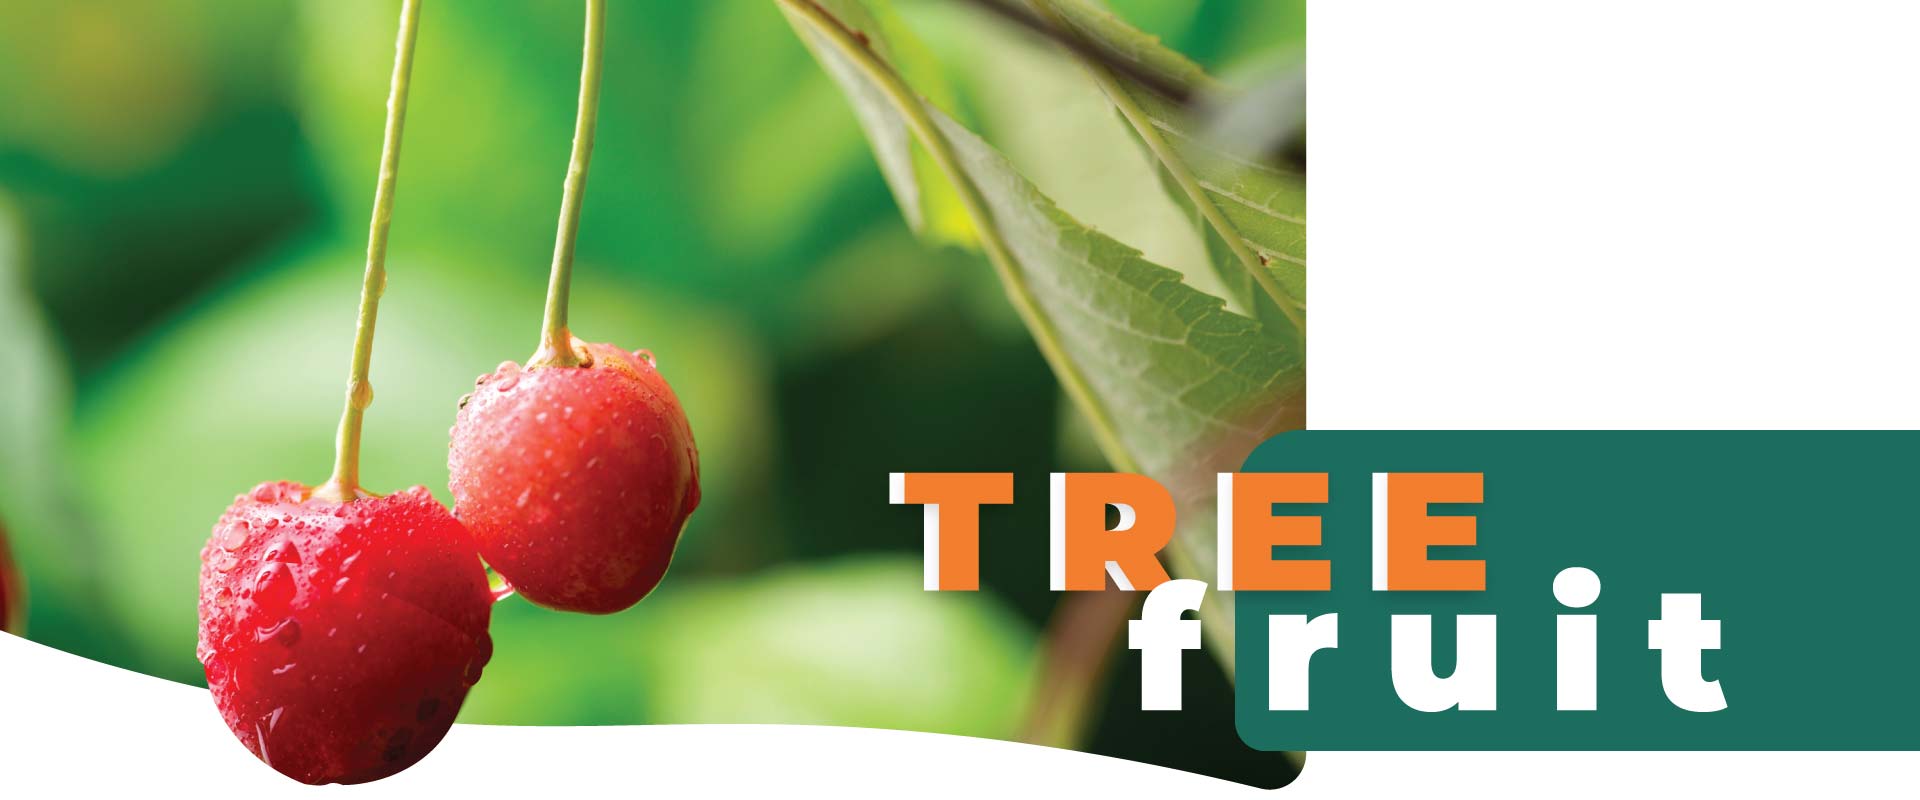 <a href="https://valleypackinginc.com/tree-fruit">Tree Fruit</a> produce in california united states